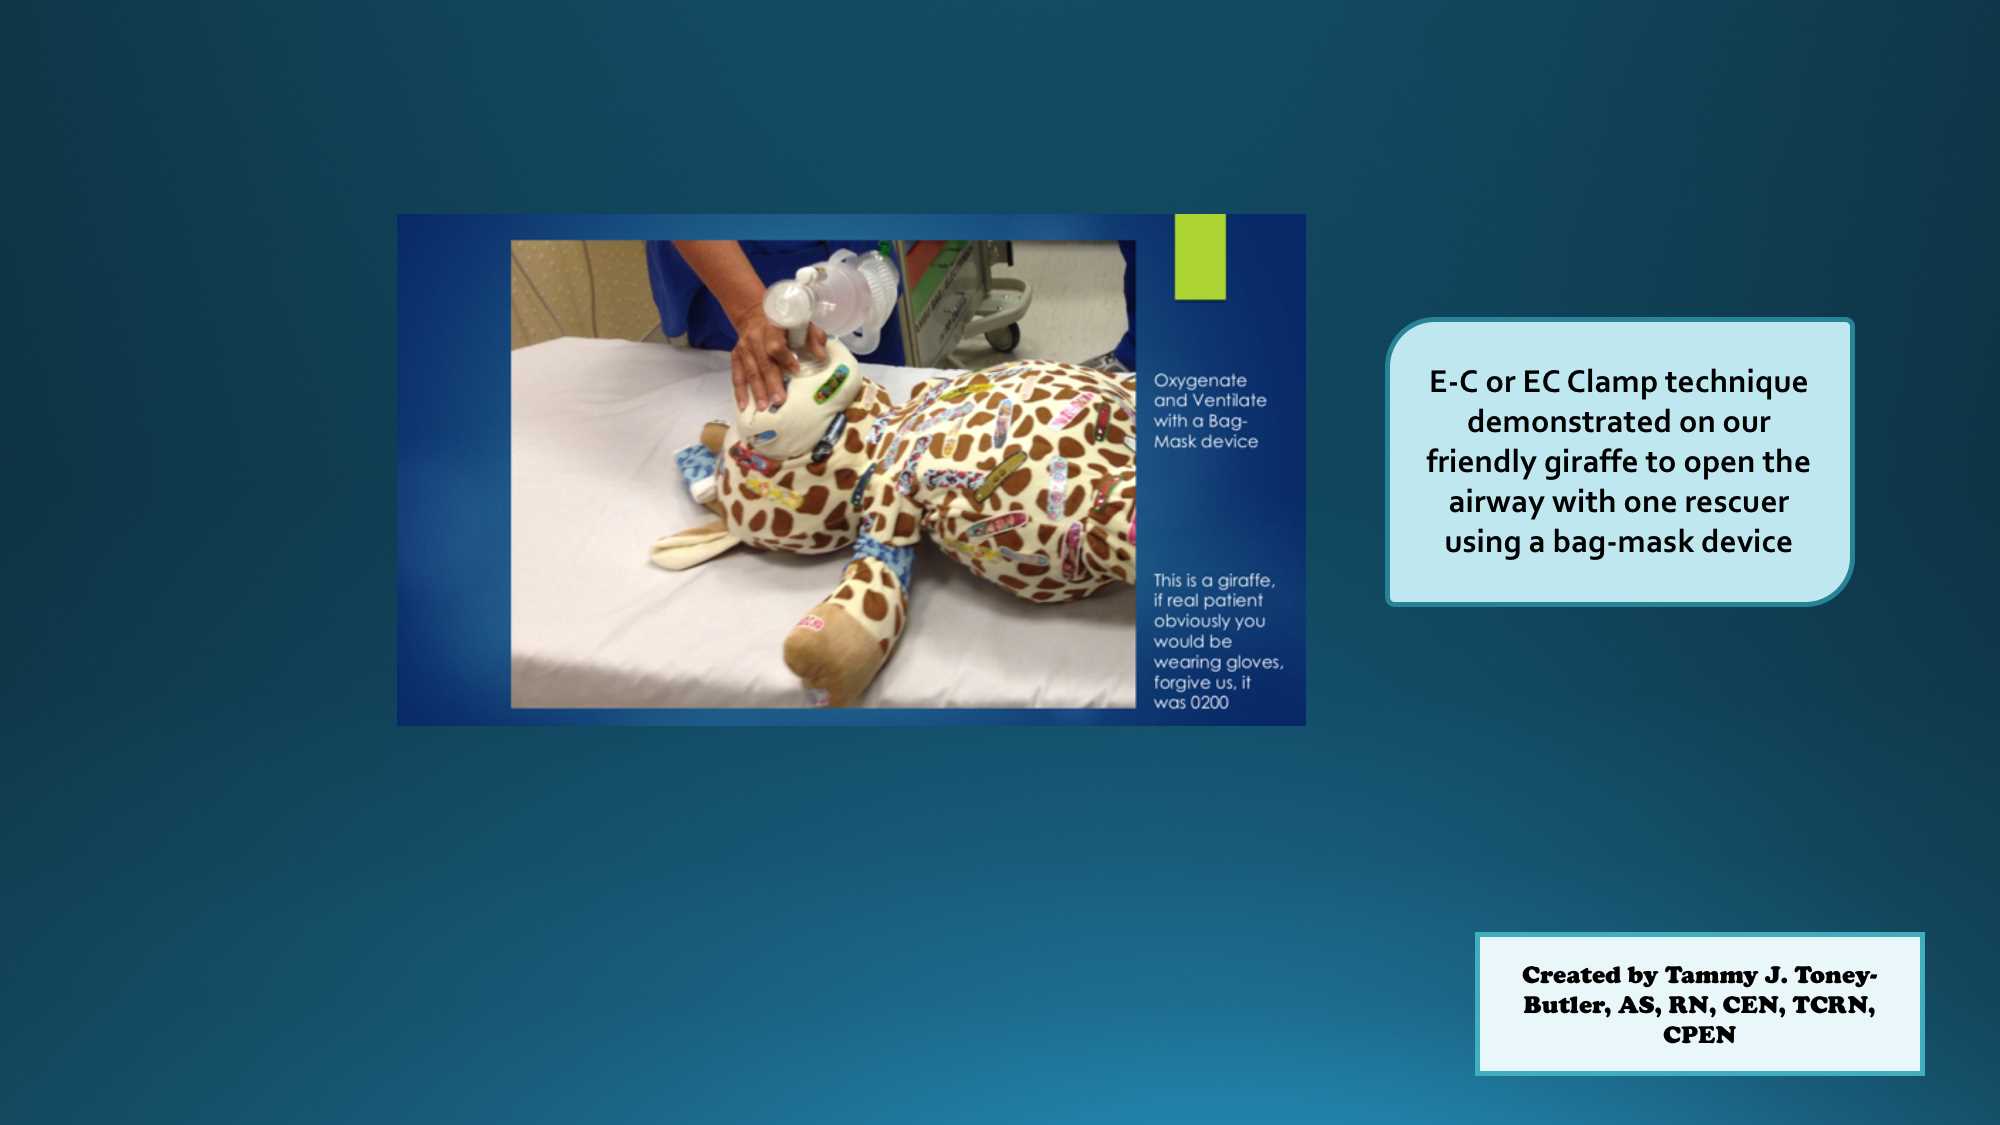 EC or E-C technique of opening an airway with one rescuer to facilitate bag-mask ventilation.